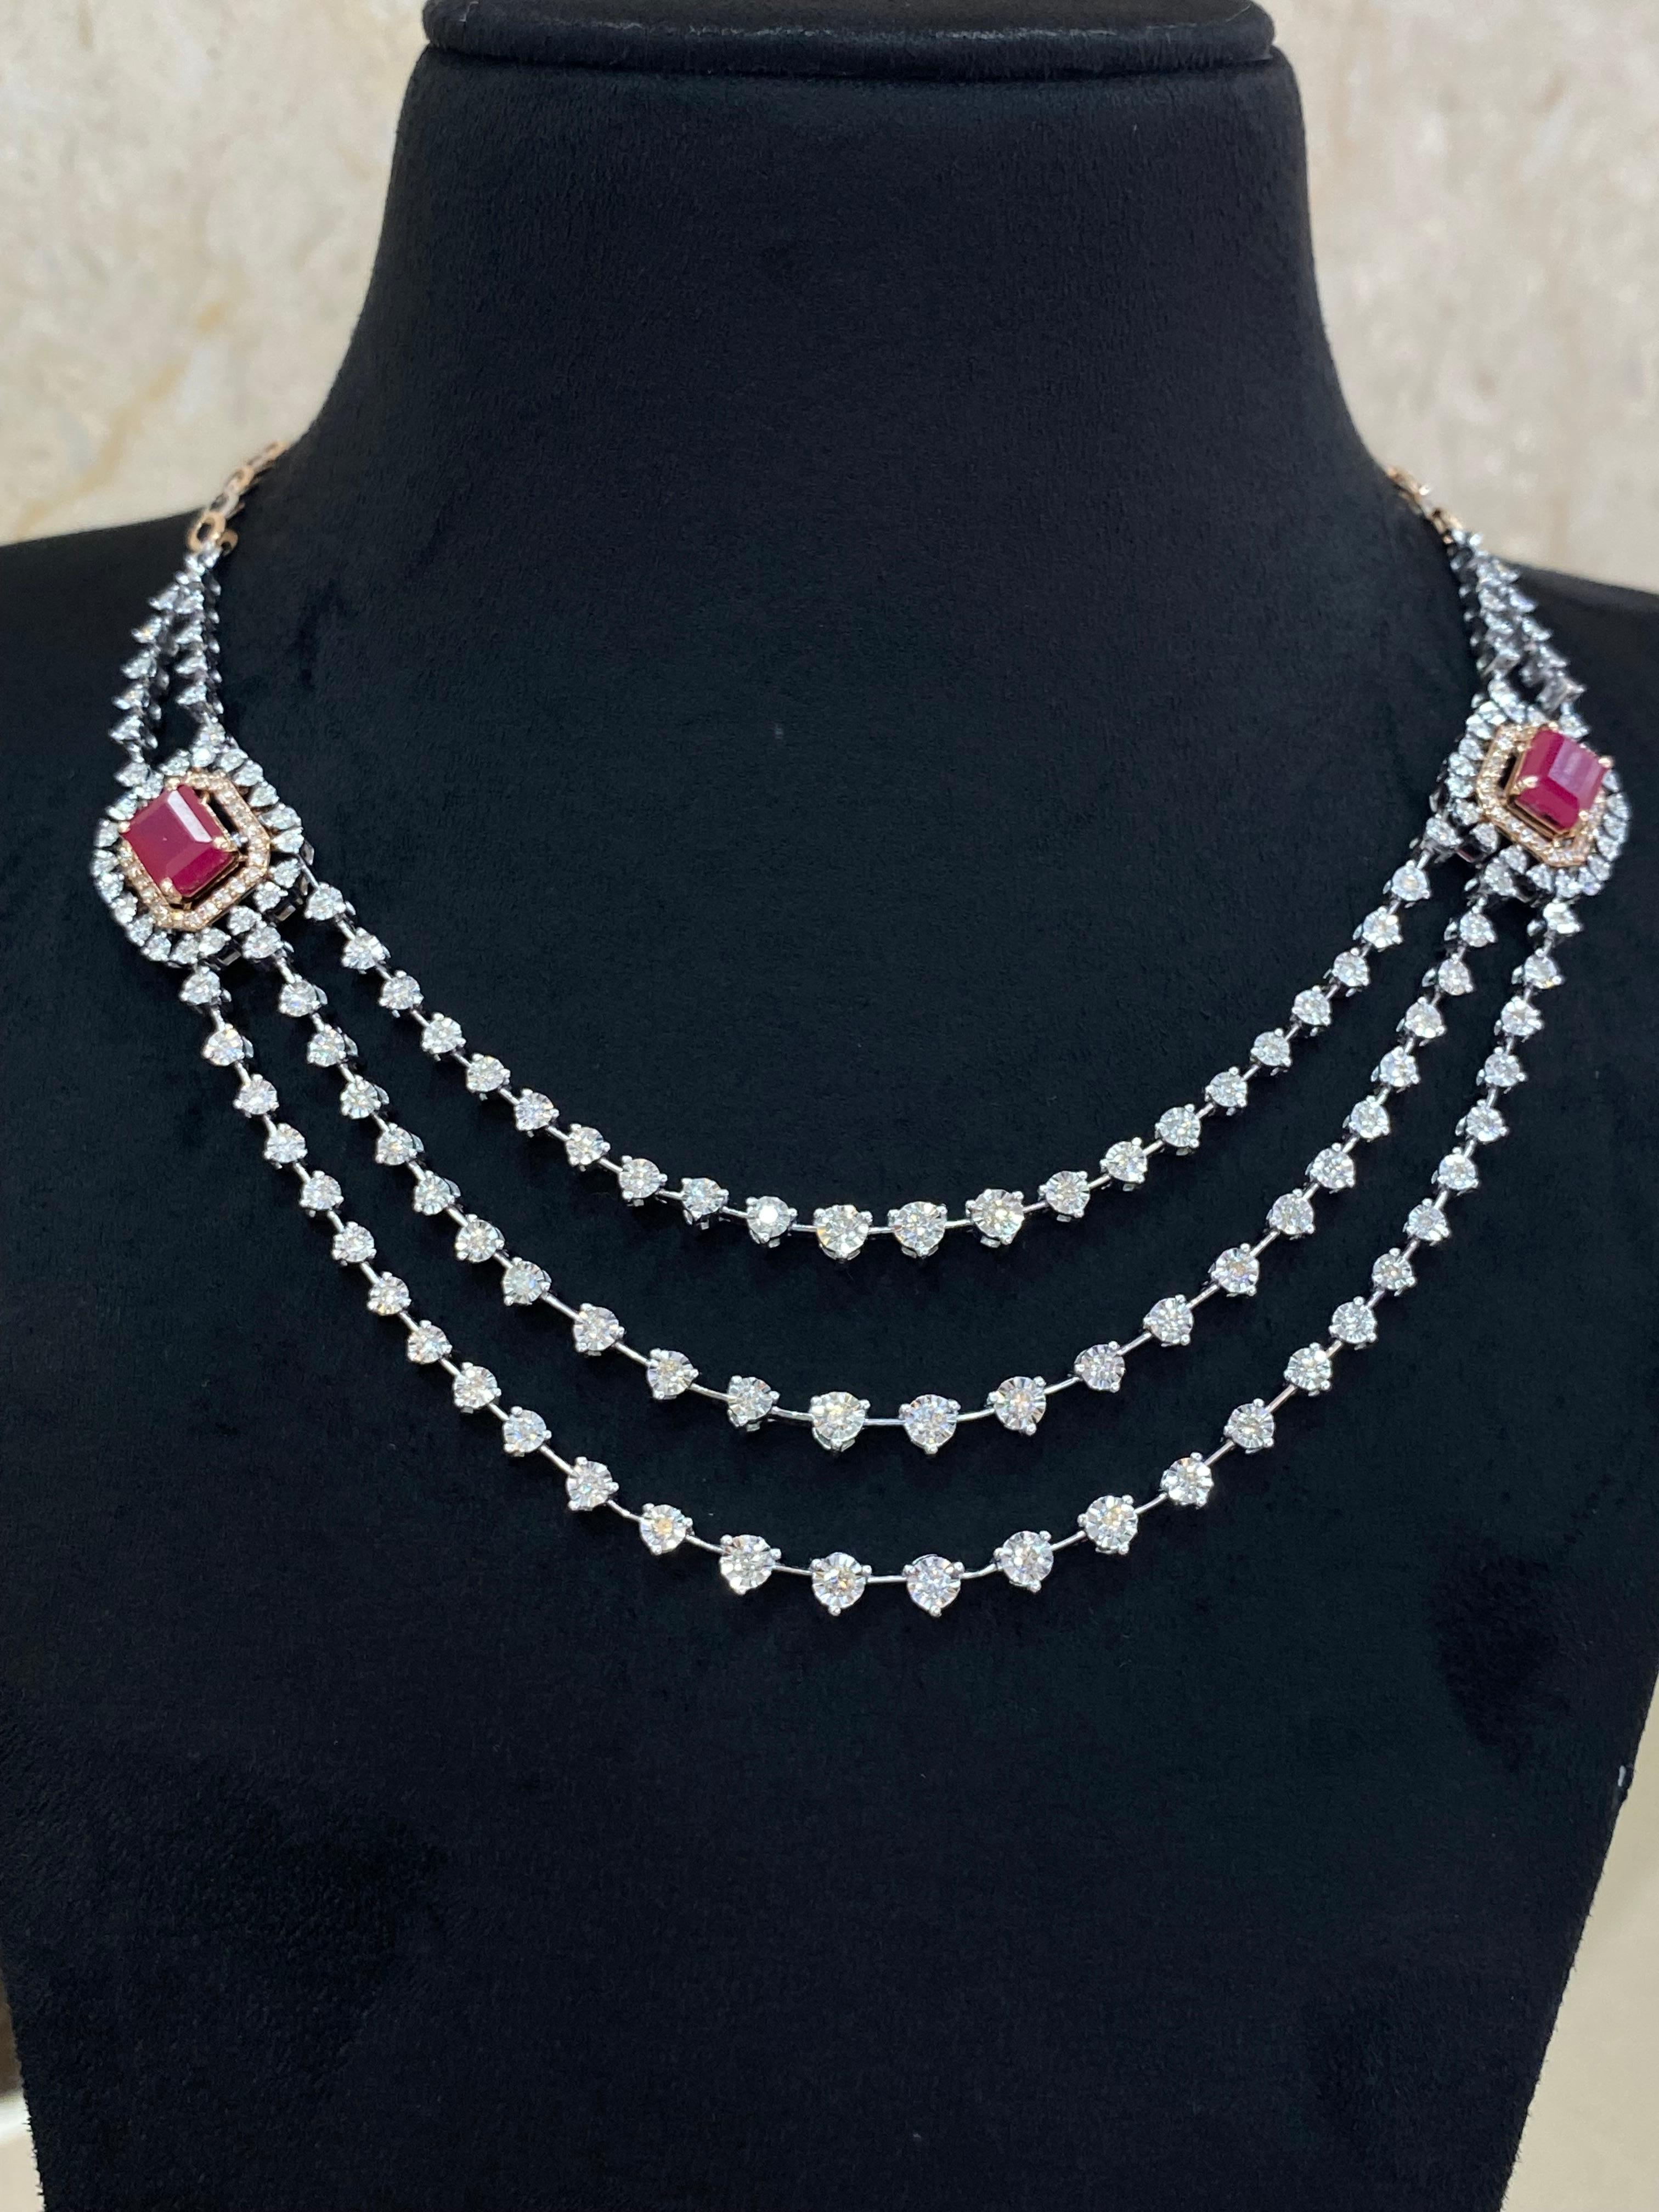 Elevate your elegance with the breathtaking allure of these exquisite three-strand tennis necklaces, featuring dazzling 2.69 carats of diamonds and 4.20 carats of radiant rubies. Infuse glamour into your ensemble effortlessly!

Specifications :